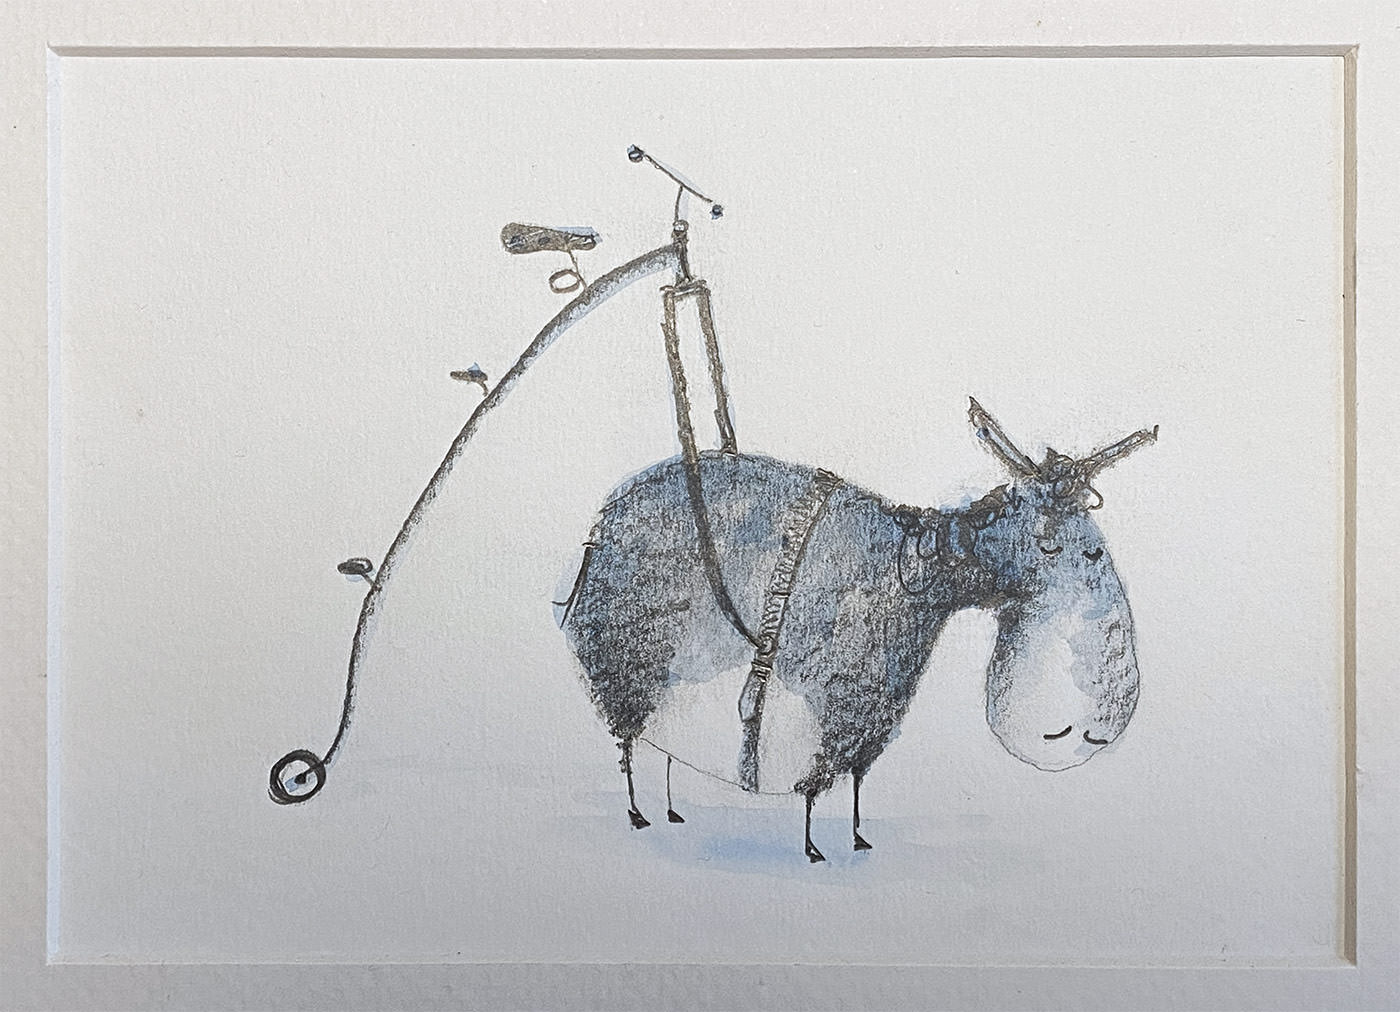 A pencil sketch of a penny-farthing bicycle, with a sleepy donkey in place of the large front wheel.